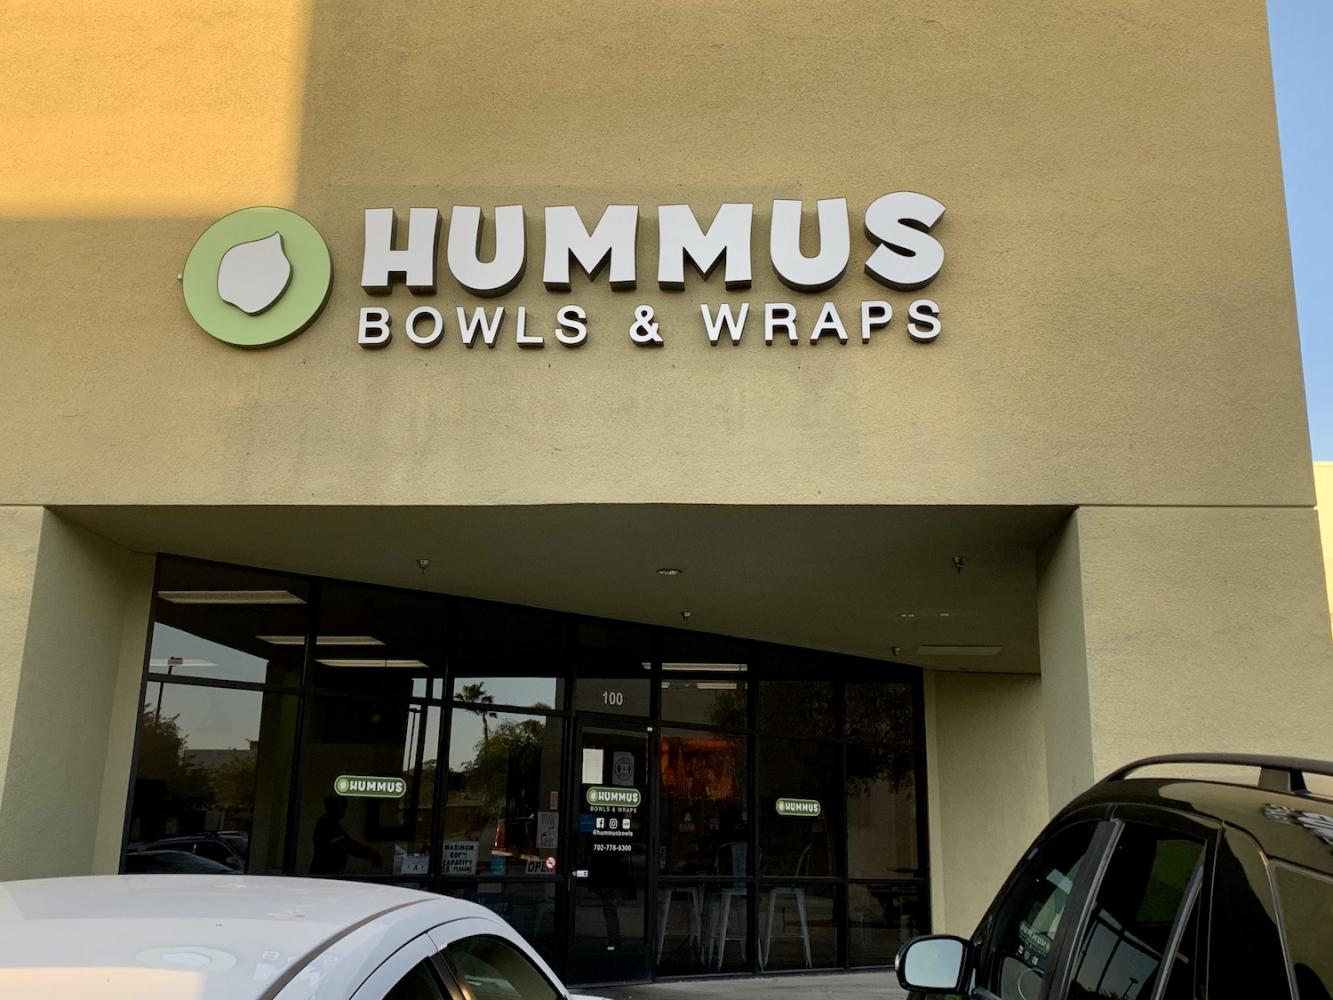 Personalizing+the+experience+for+every+customer%2C+HUMMUS+offers+bowls%2C+wraps+and+fresh+squeezed+juices+using+ingredients+prepared+daily+.+Rating%3A+A%2B+Photo+Credit%3A+Naila+Yazdani+